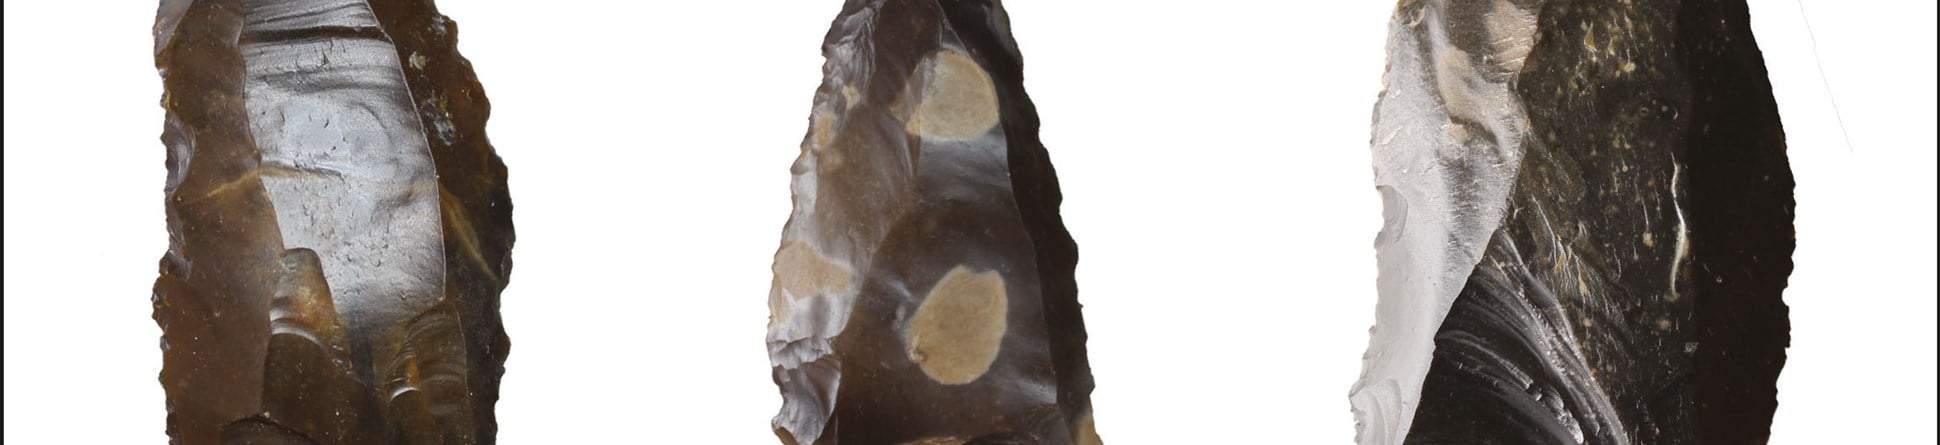 A photograph showing three views of stone tools.